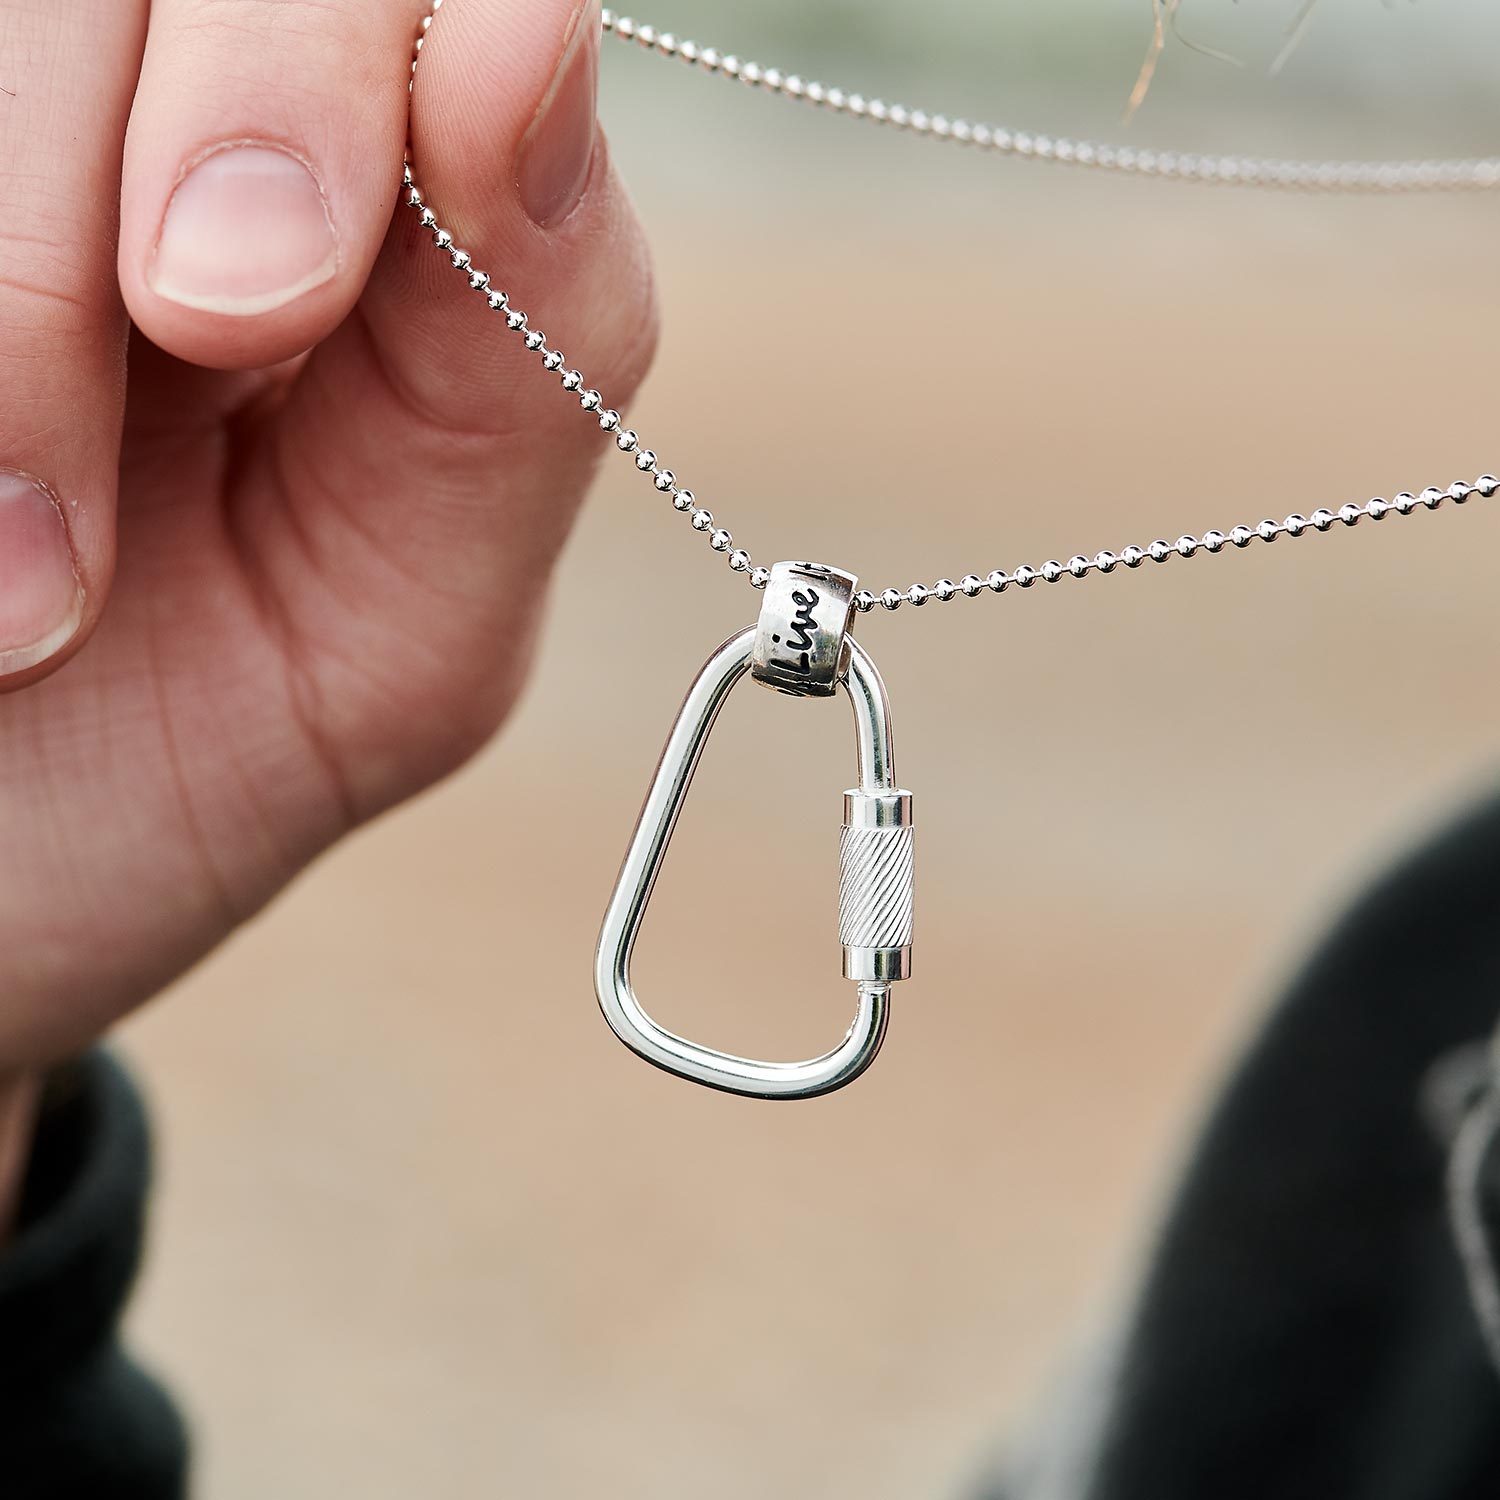 Climbing Carabiner One Life, Live it Silver Necklace - mens gift for adventurers